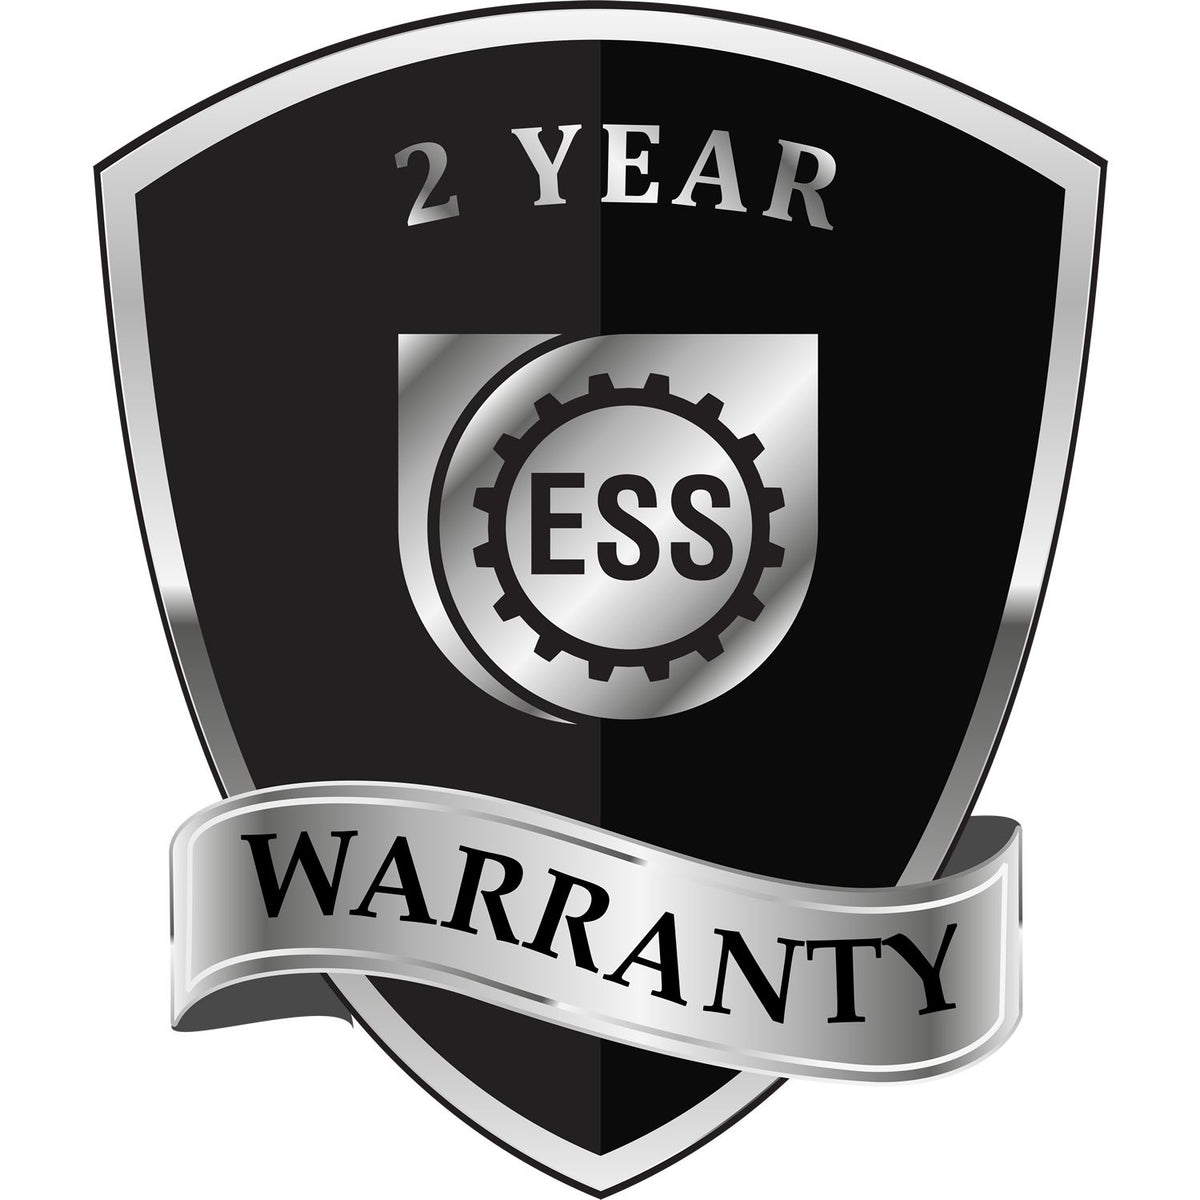 A badge or emblem showing a warranty icon for the Extended Long Reach Minnesota Surveyor Embosser